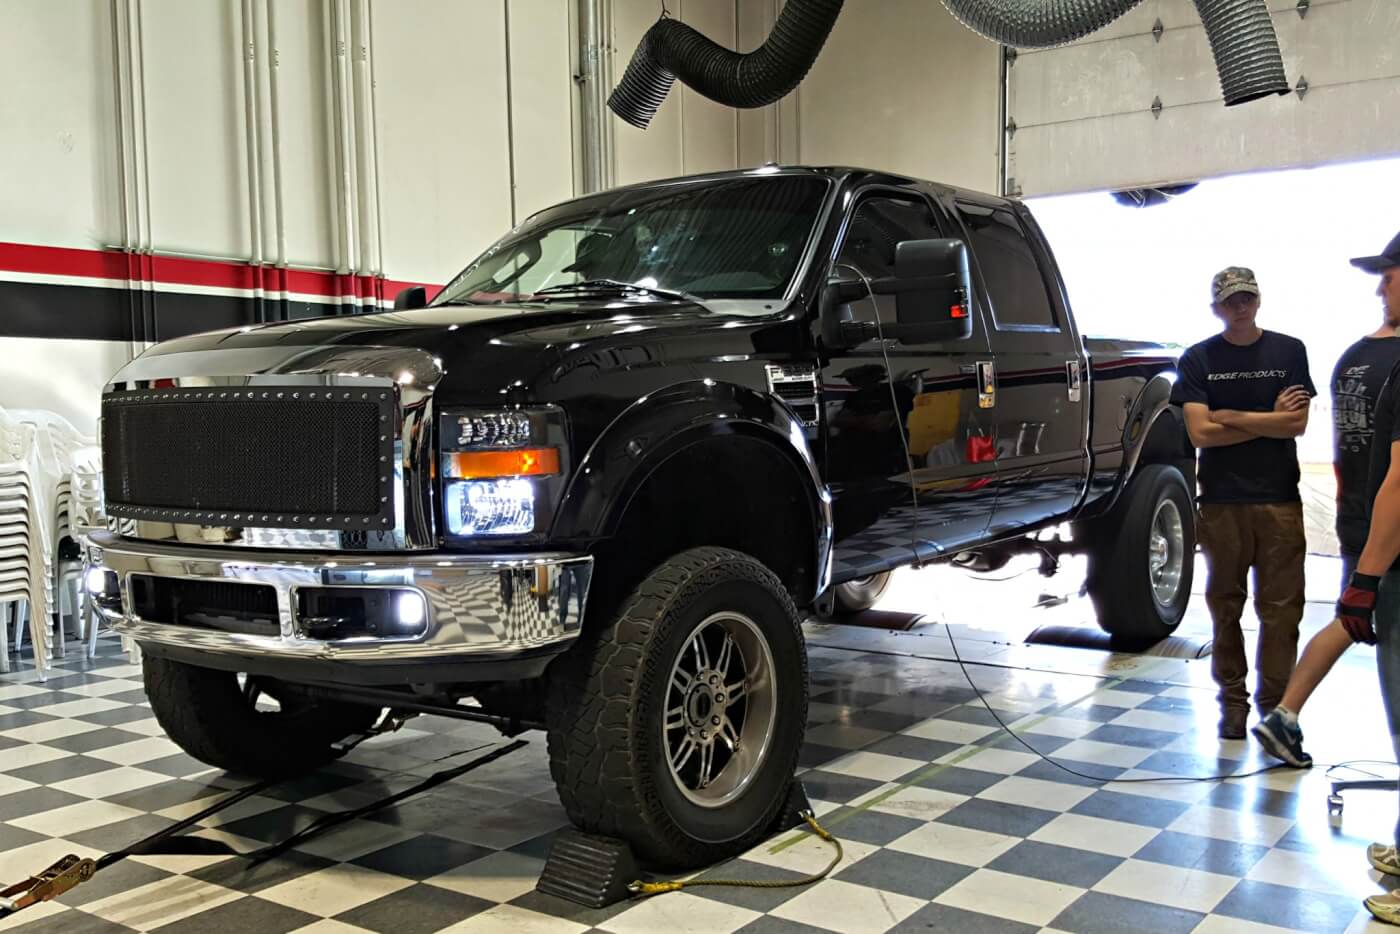 For the 2015 Northwest Dyno Circuit series, organizers opted to place the 6.4L Power Strokes in a class of their own due to their stock twin-turbo system. Weekend on the Edge had the season’s best showing of Fords all year, with nine 6.4L trucks competing for first place.